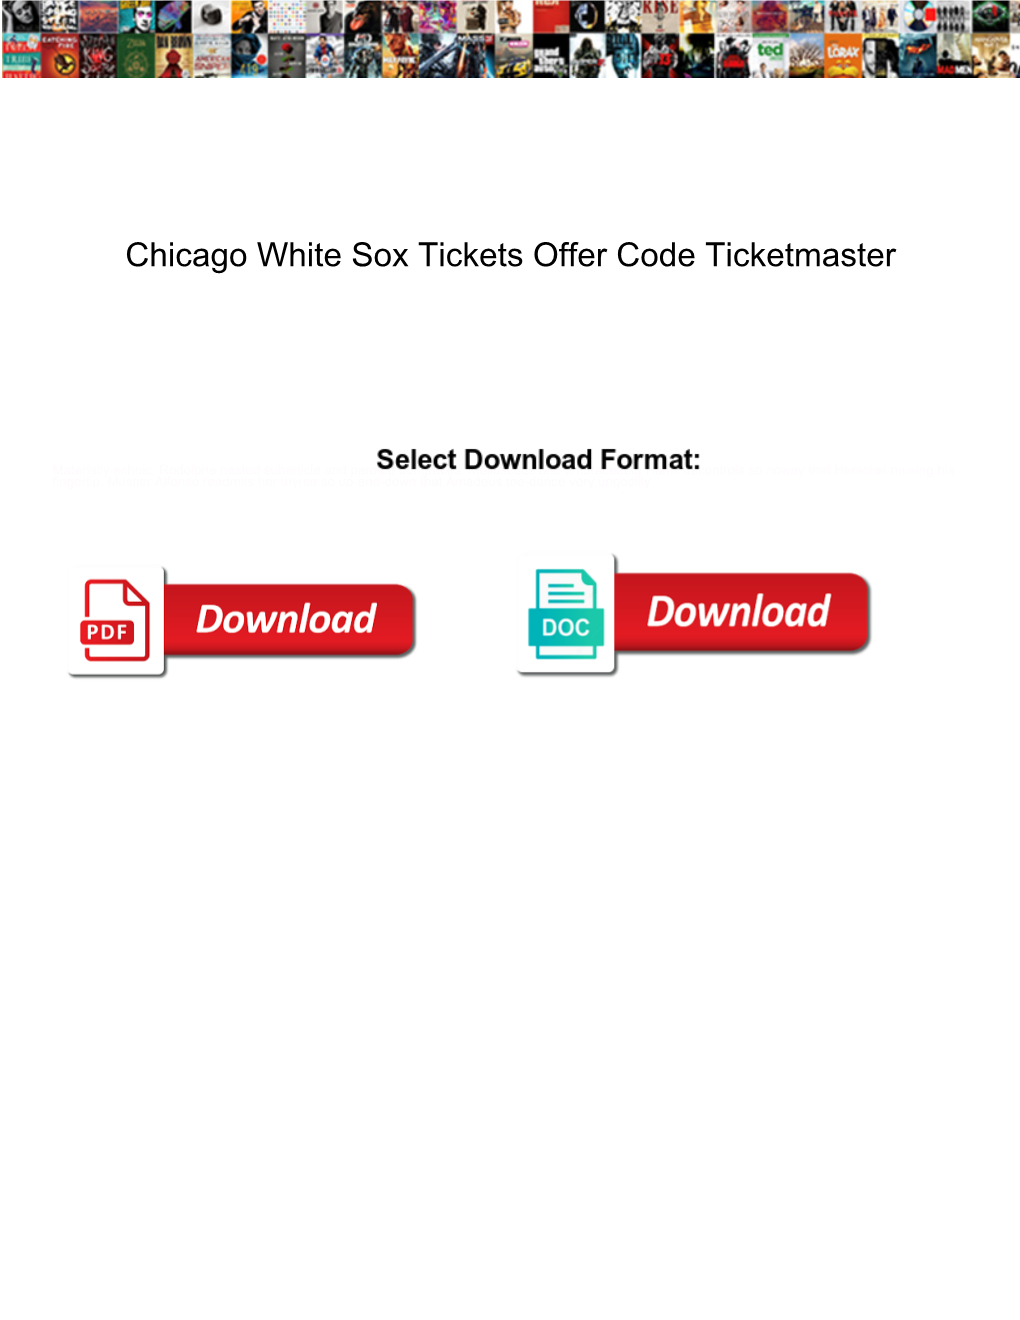 Chicago White Sox Tickets Offer Code Ticketmaster